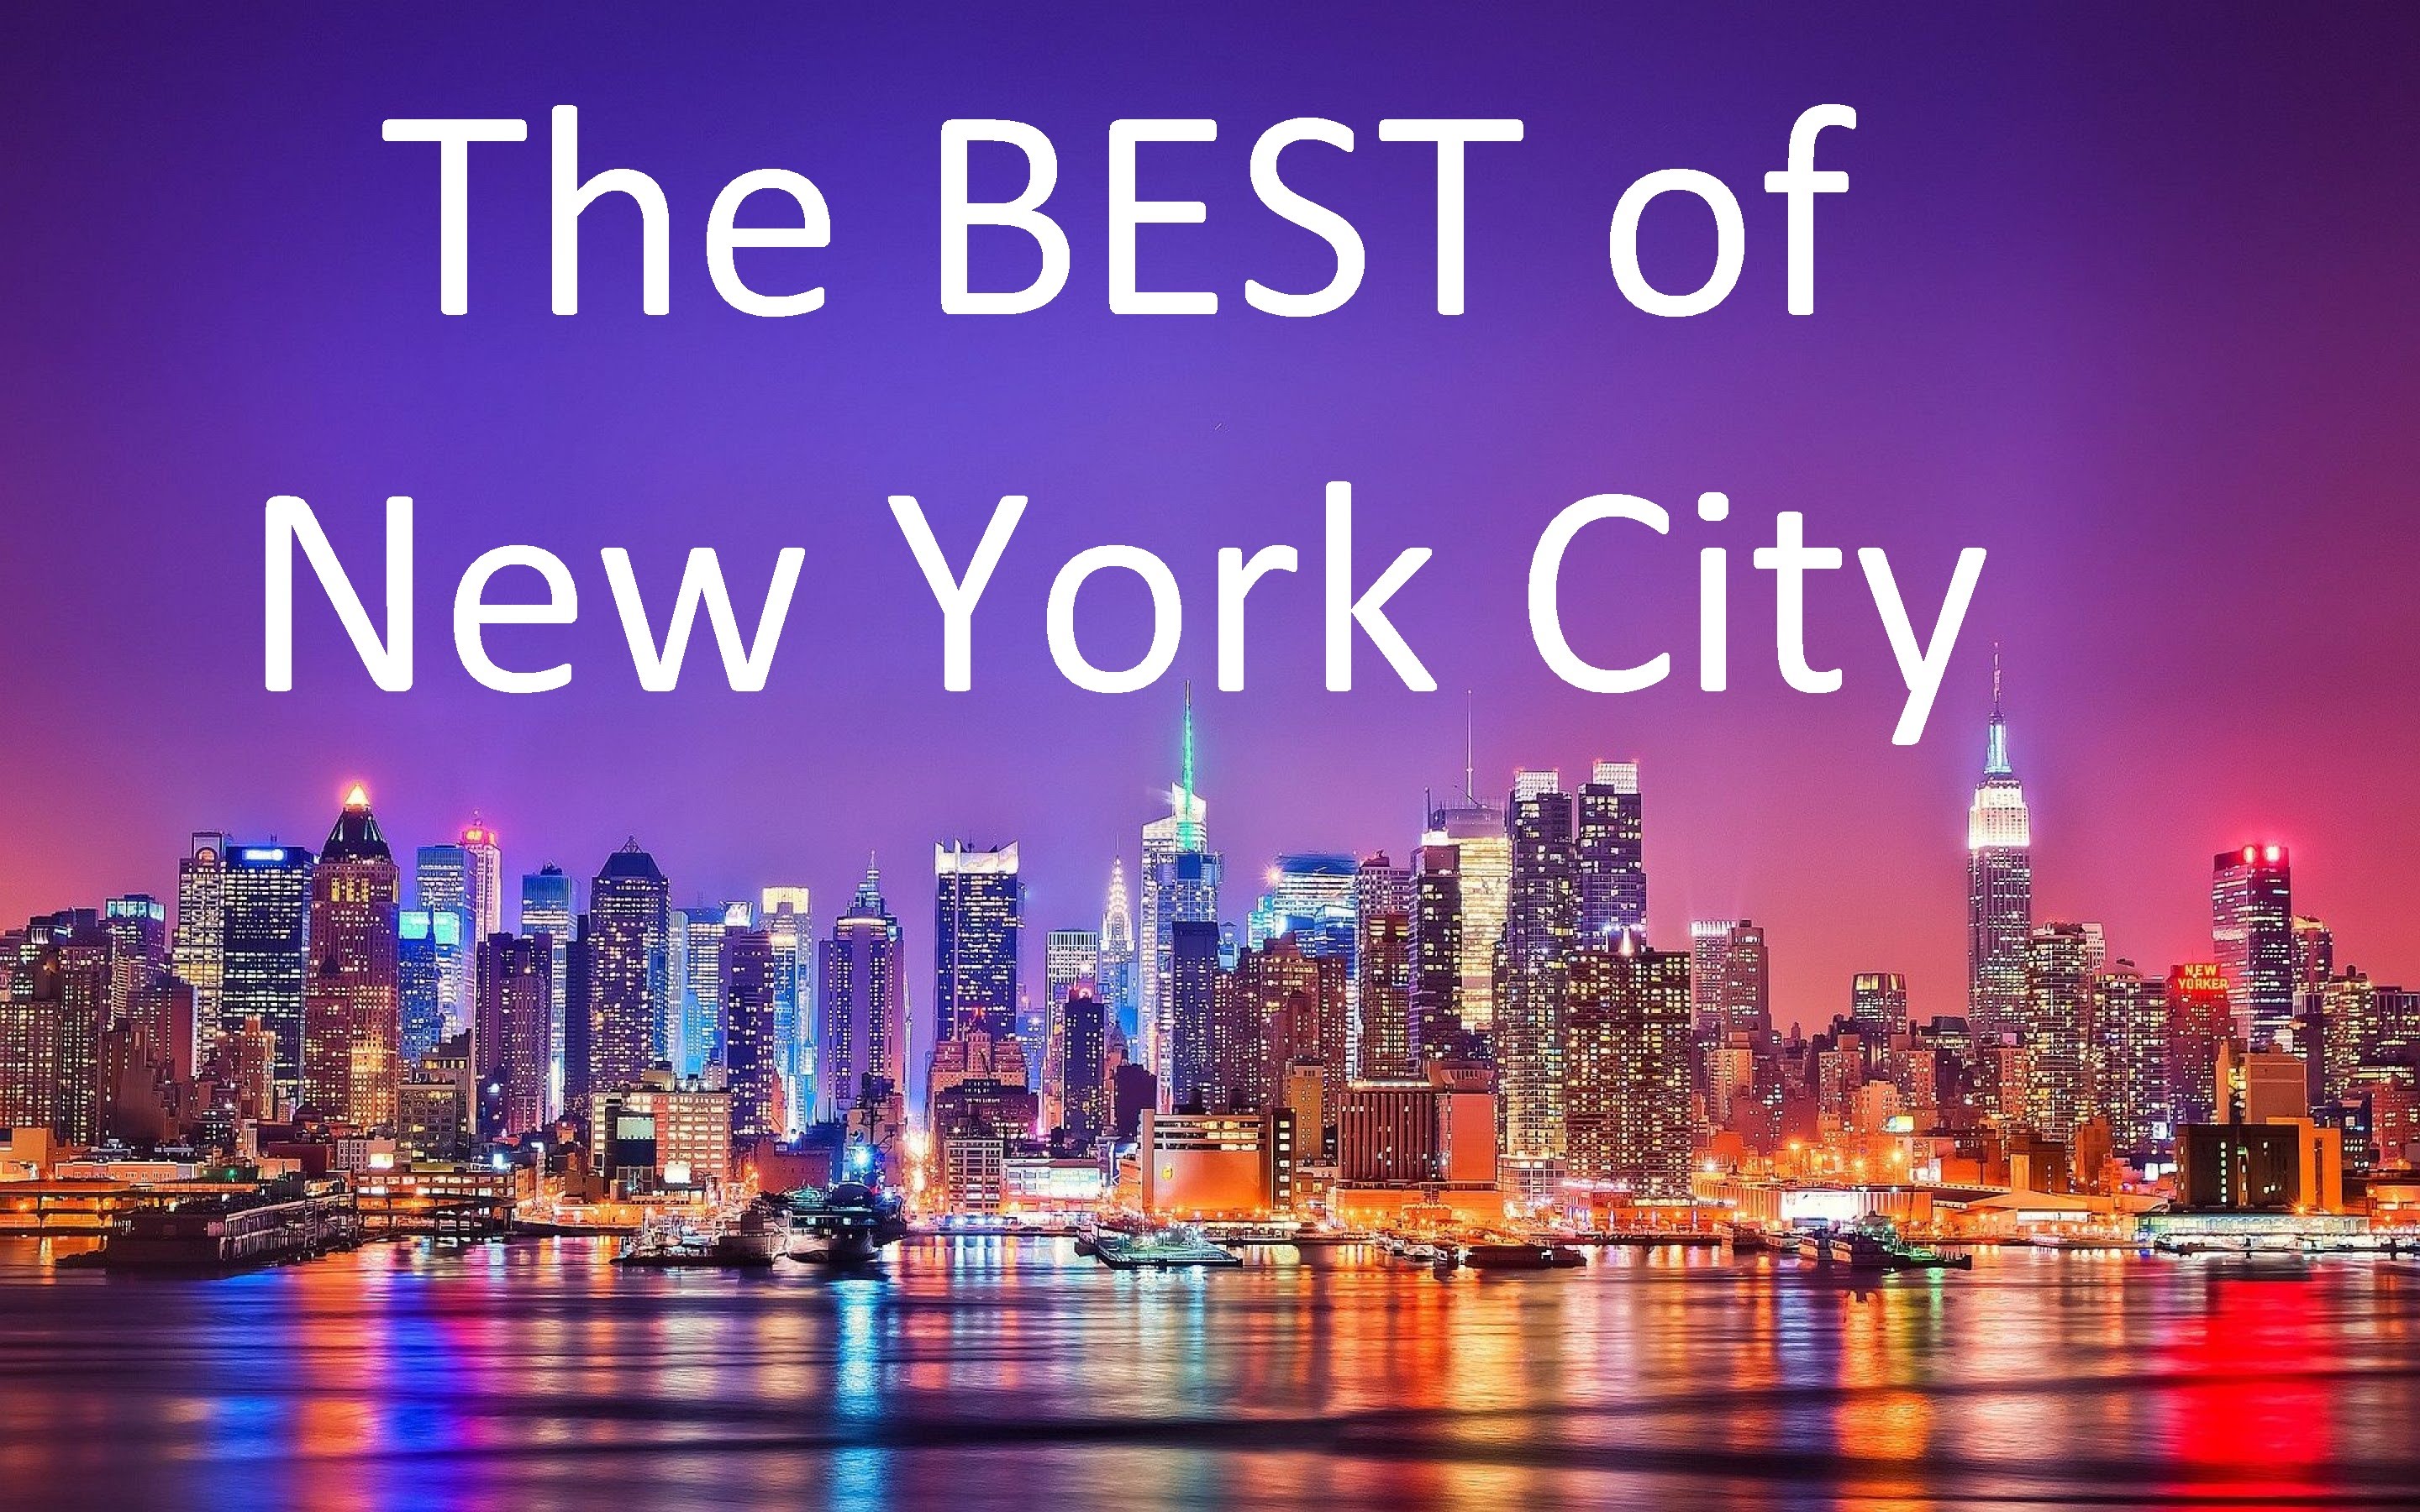 New York City: Top 10 Places to Visit - YouTube